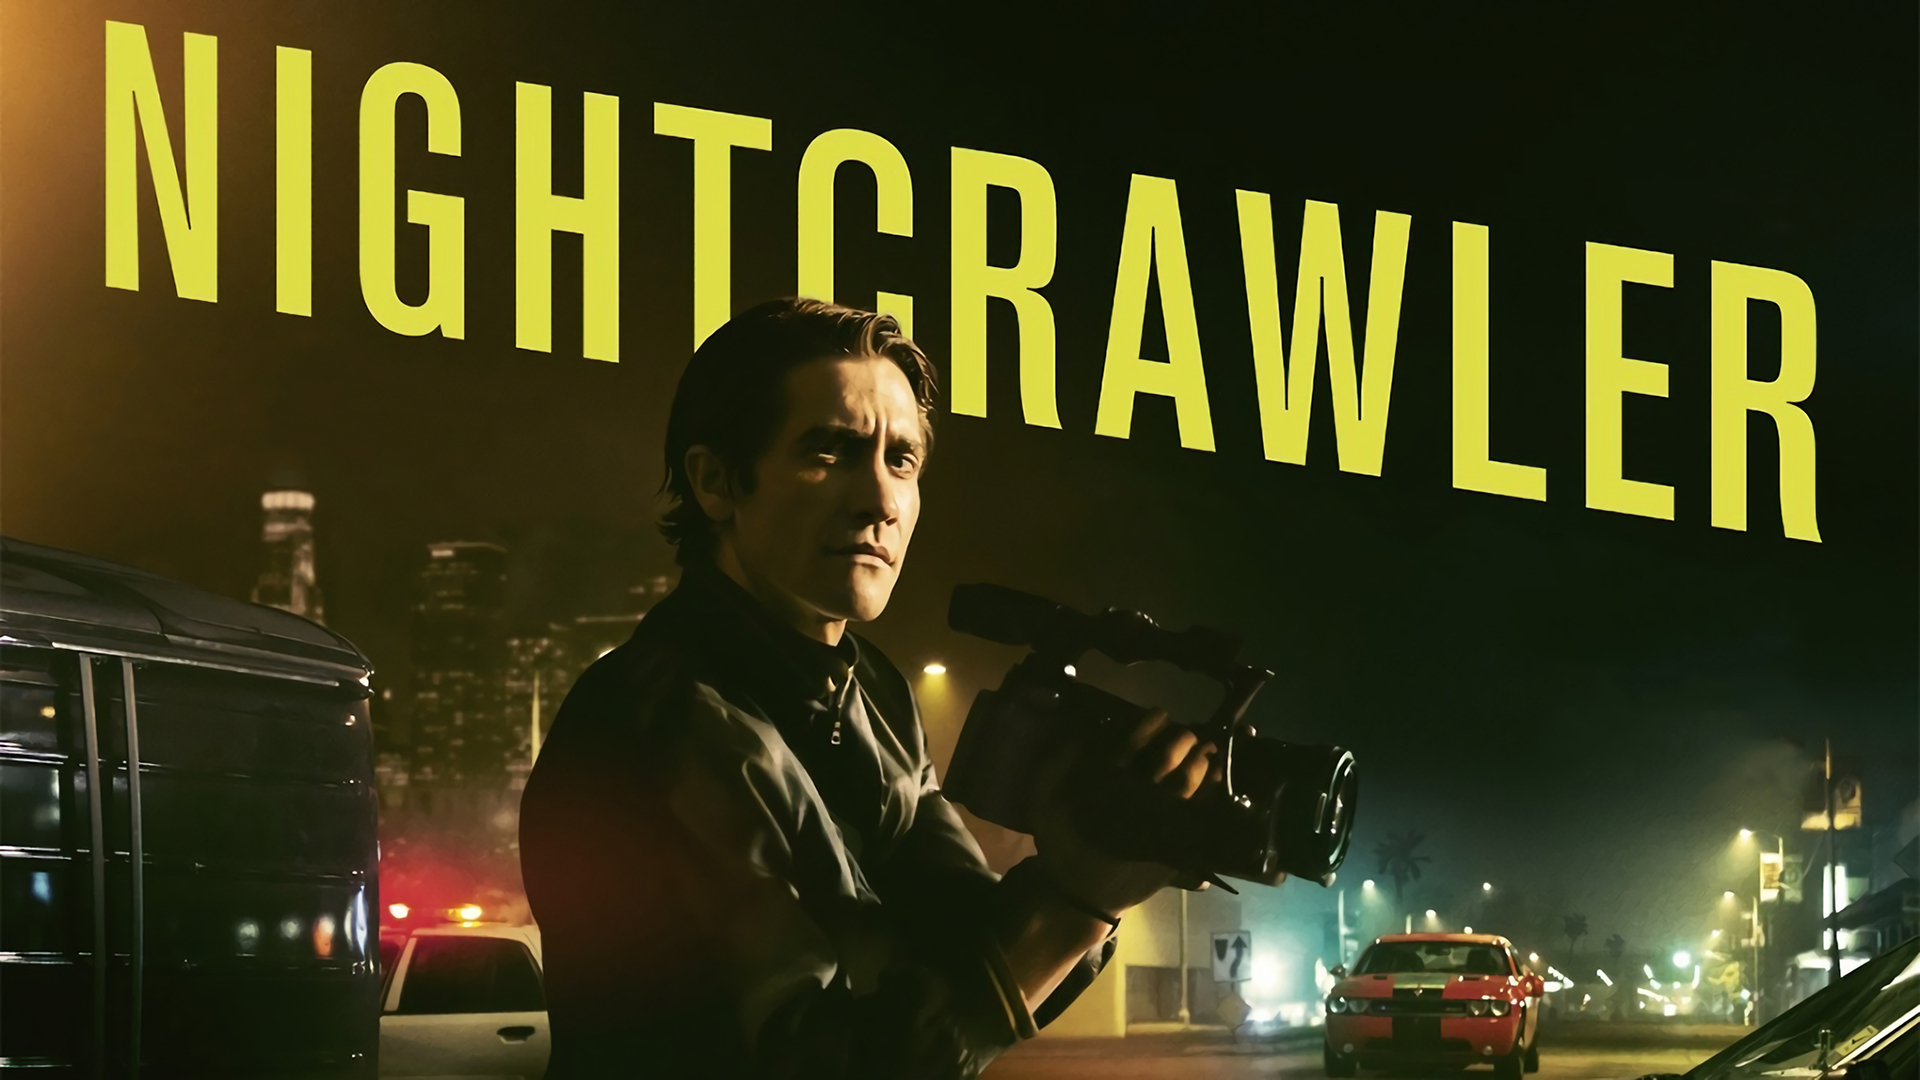 1920x1080 20+ Nightcrawler HD Wallpapers and Backgrounds